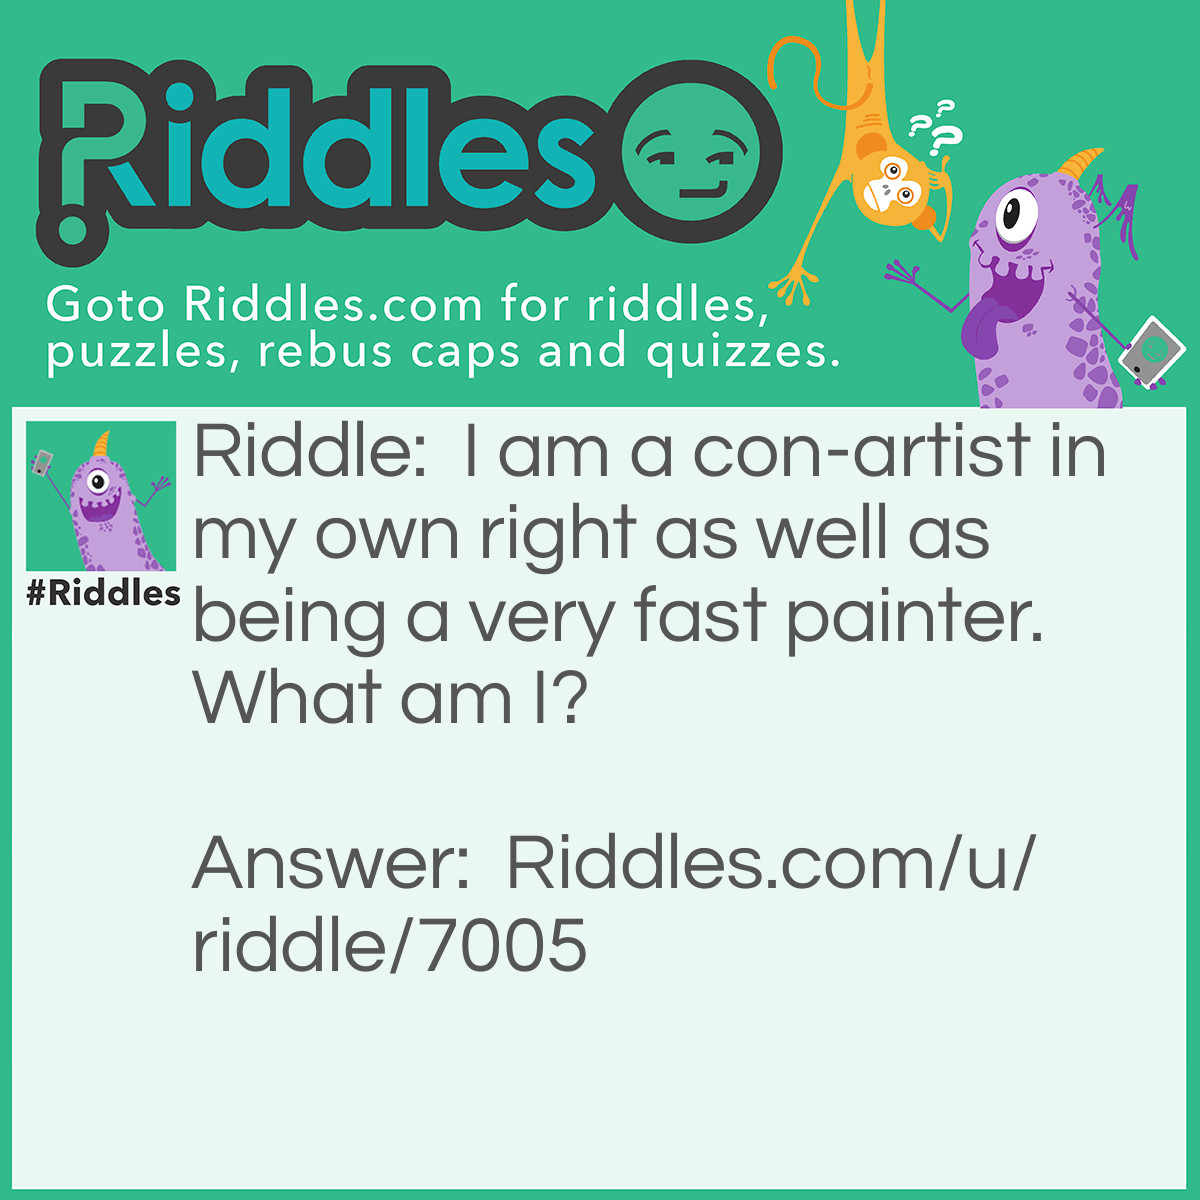 Riddle: I am a con-artist in my own right as well as being a very fast painter. What am I? Answer: A Printer.